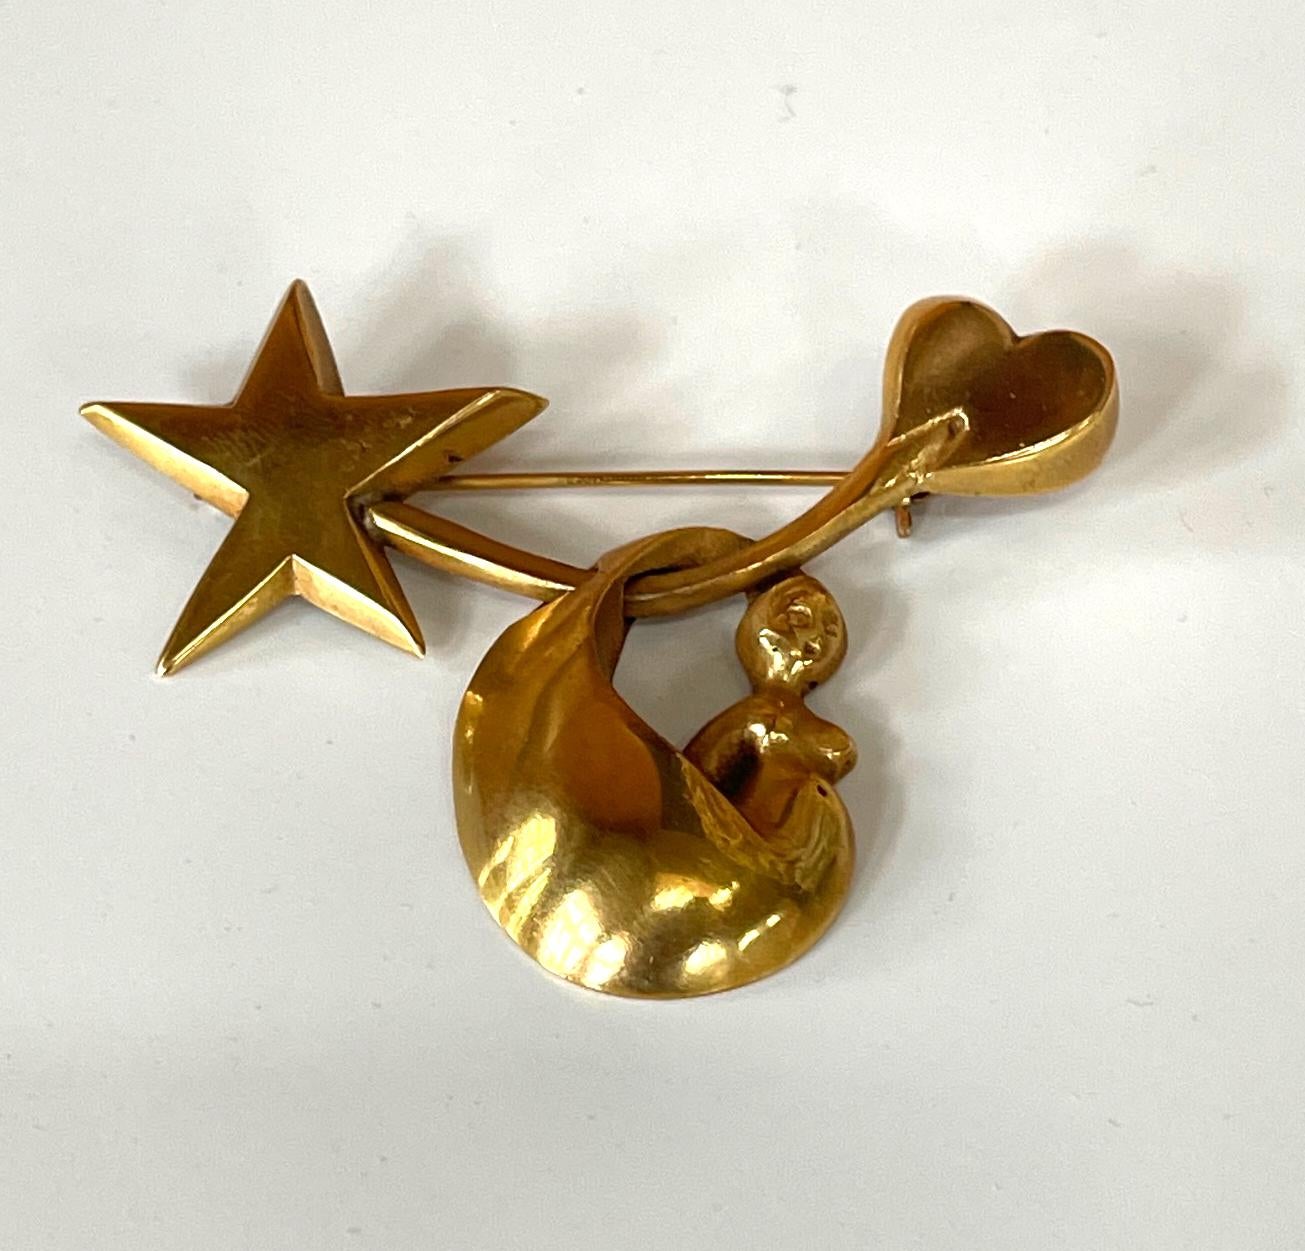 A lovely brooch in gilt cast bronze made by French Parisian art jeweler Line Vautrin (1913-1997) circa 1940s. The brooch belongs to a collection called 